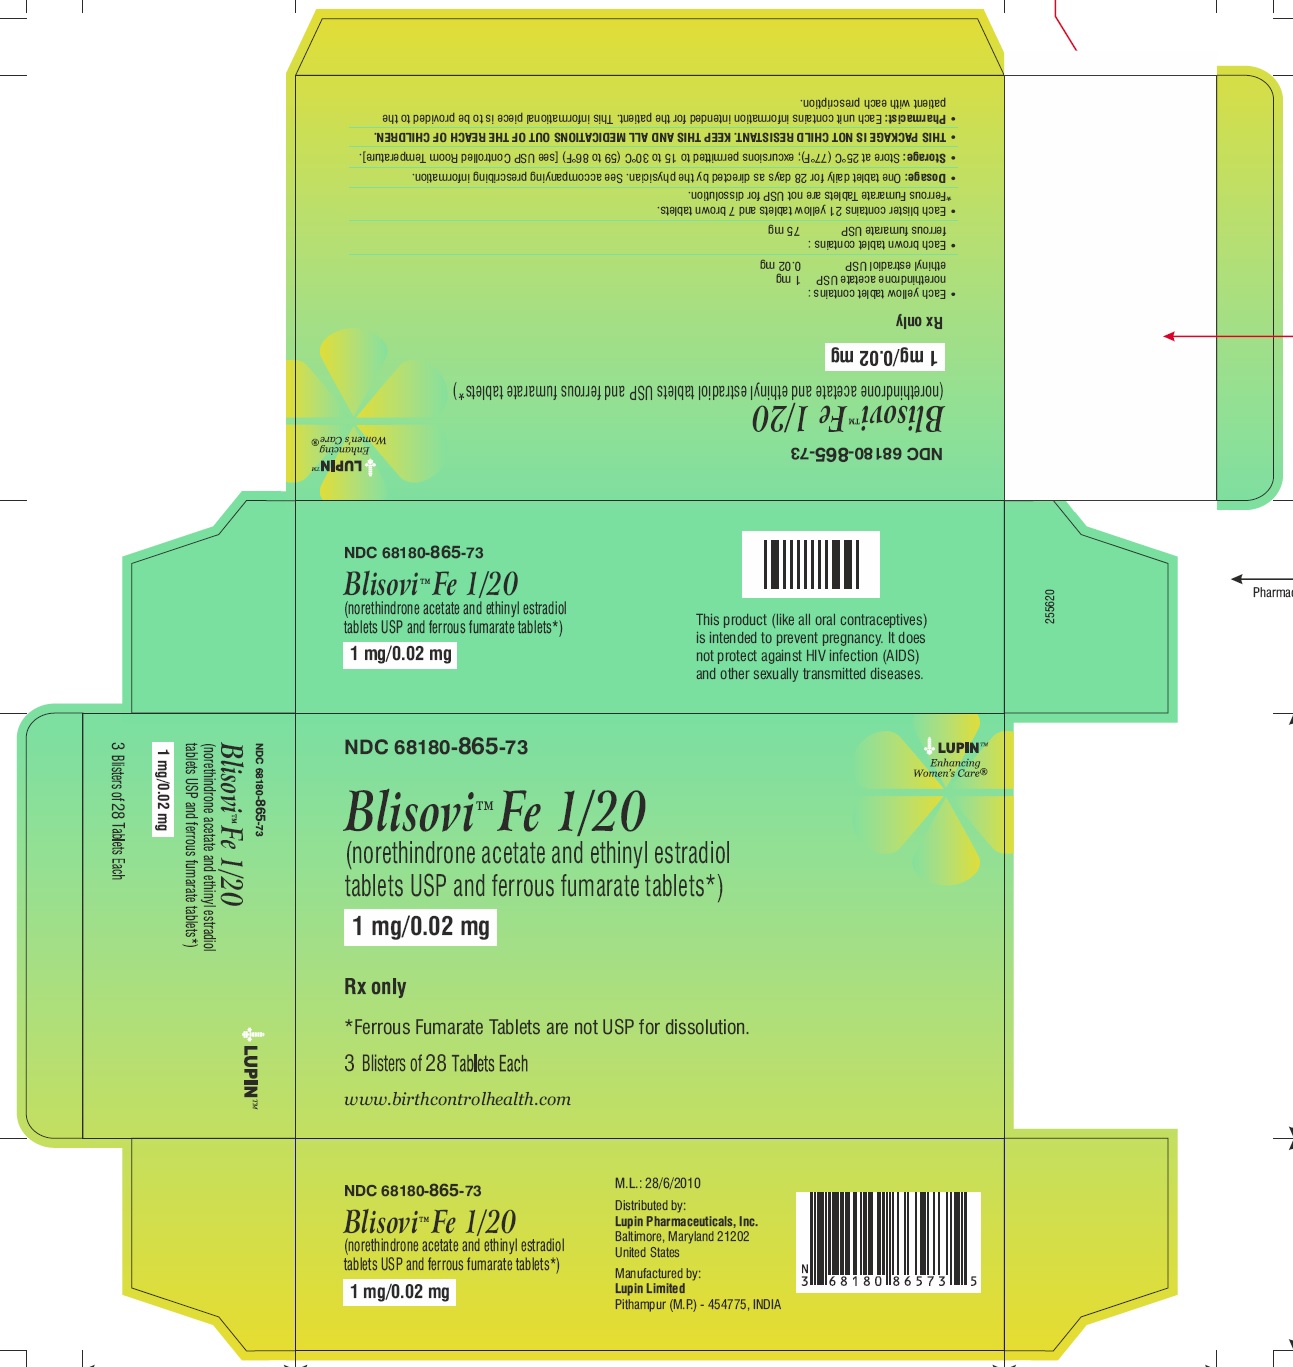 Blisovi Fe 1/20
(norethindrone acetate and ethinyl estradiol tablets USP and ferrous fumarate tablets*)
1 mg/0.02 mg
NDC: 68180-865-13
Carton: 3 Wallet of 28 Tablets Each